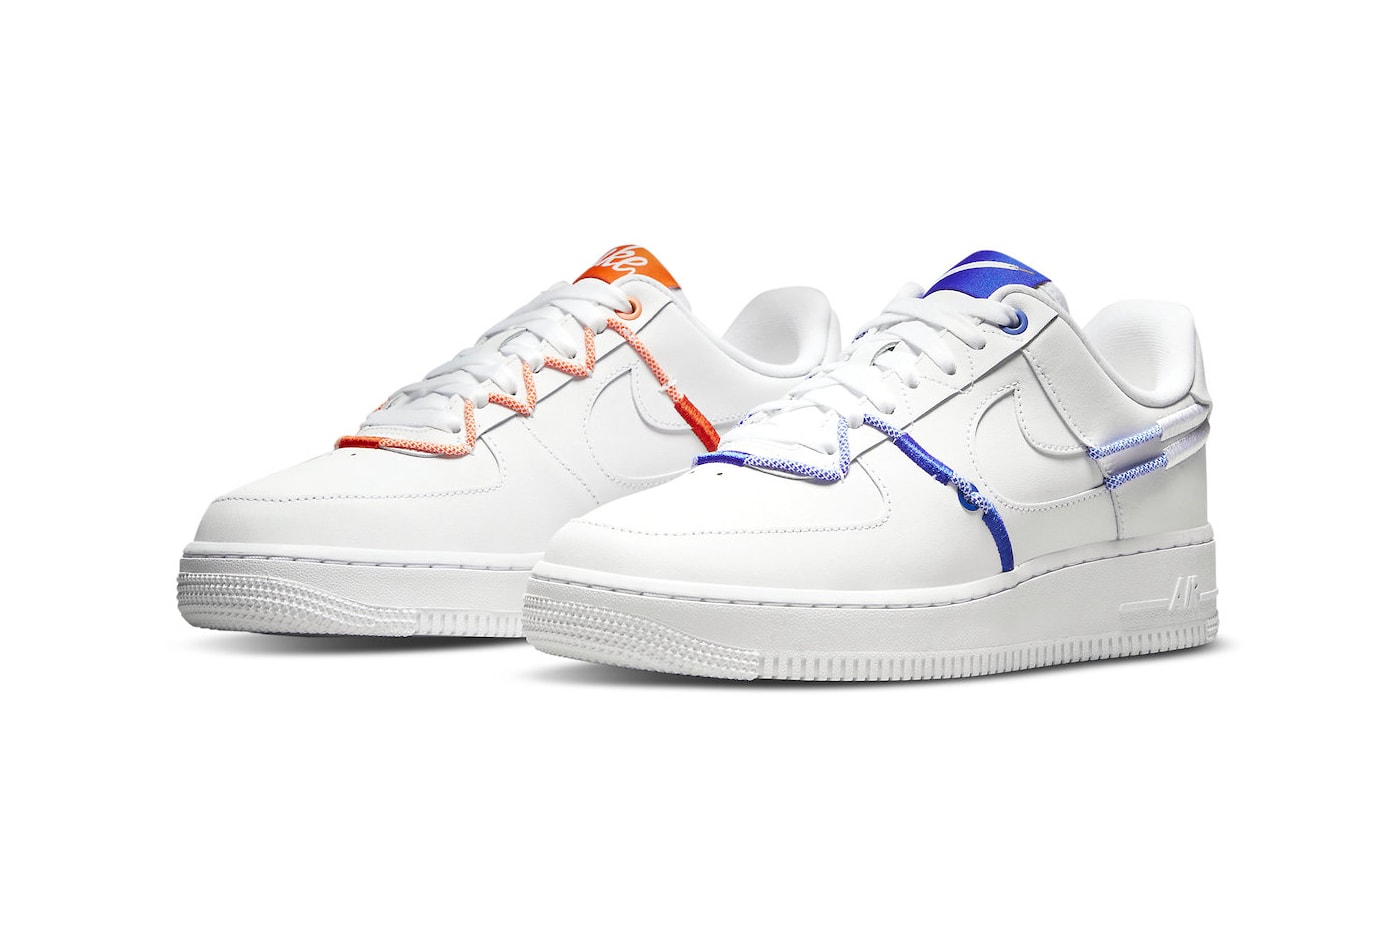 Nike Air Force 1 Low LX orange blue white Lacing details leather ny knicks cut out swooshes release info date price